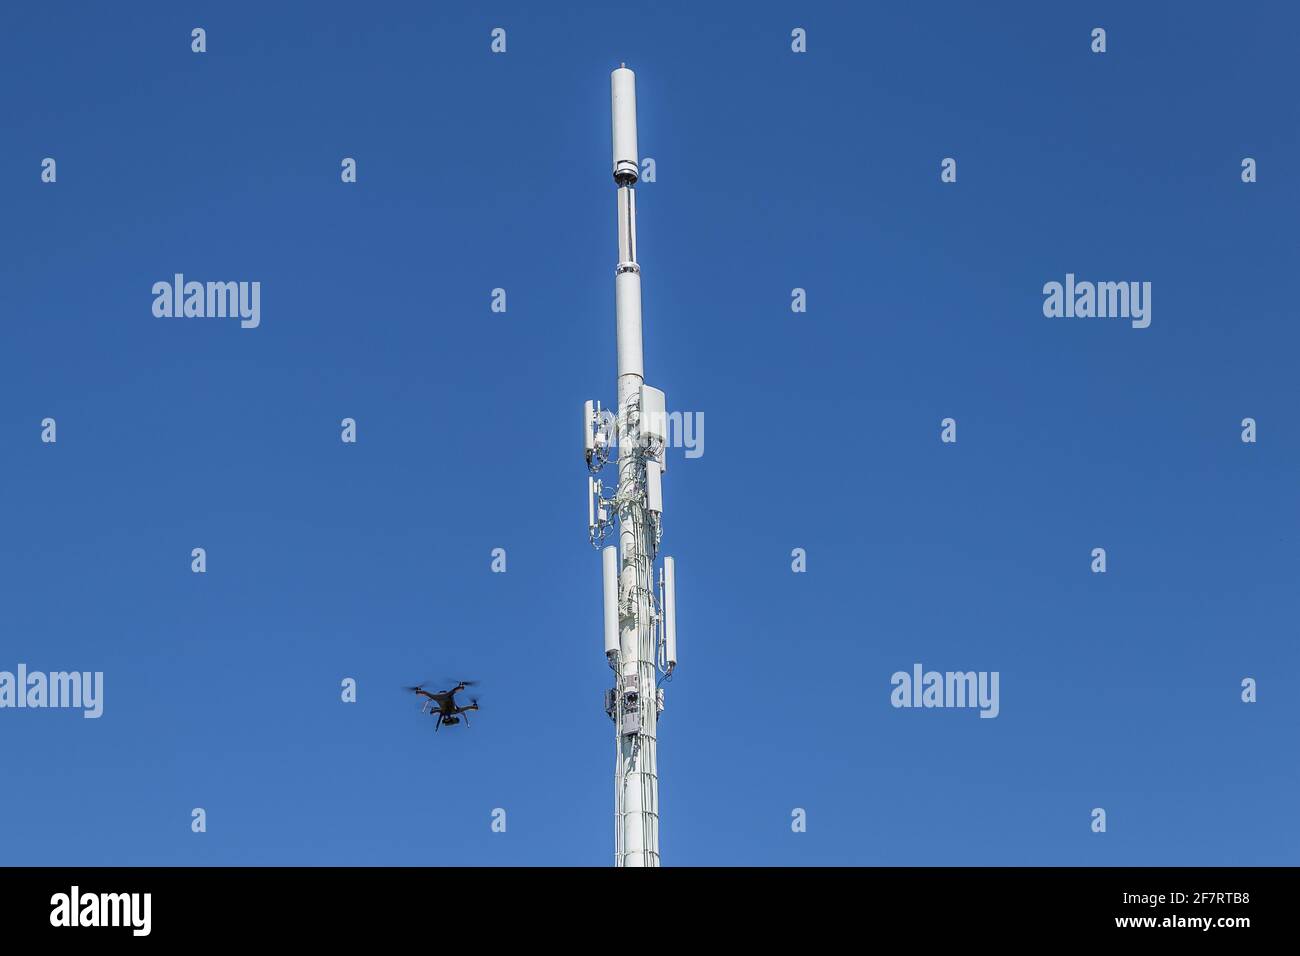 Drone inspecting a cell tower on the lower left Stock Photo